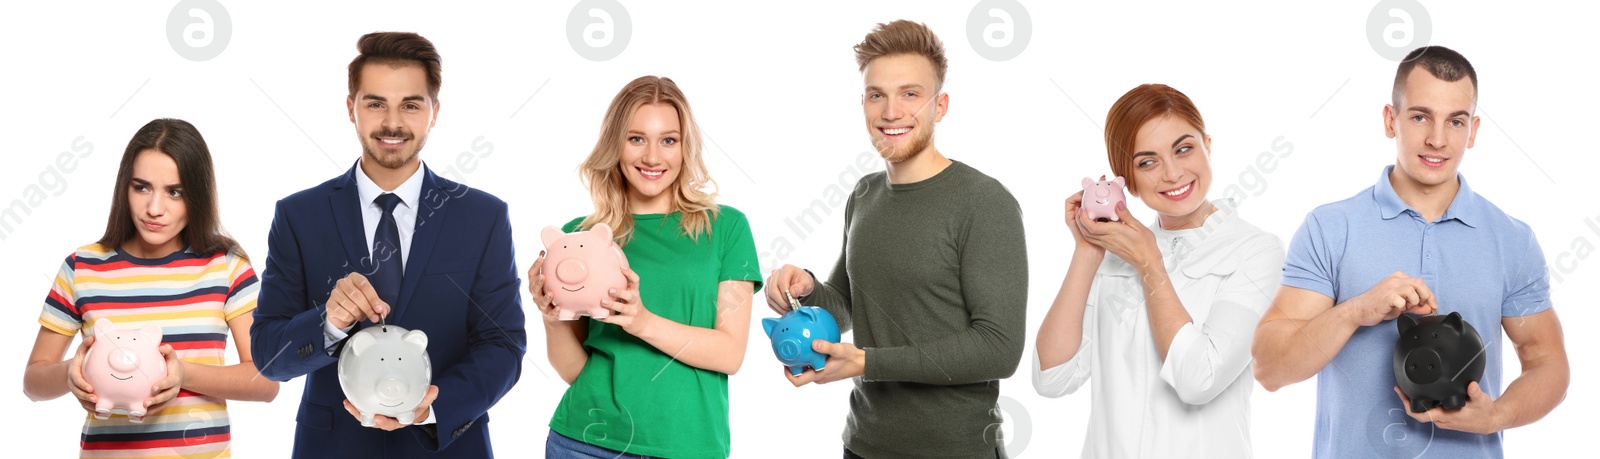 Image of Collage with photos of people holding piggy banks on white background. Banner design